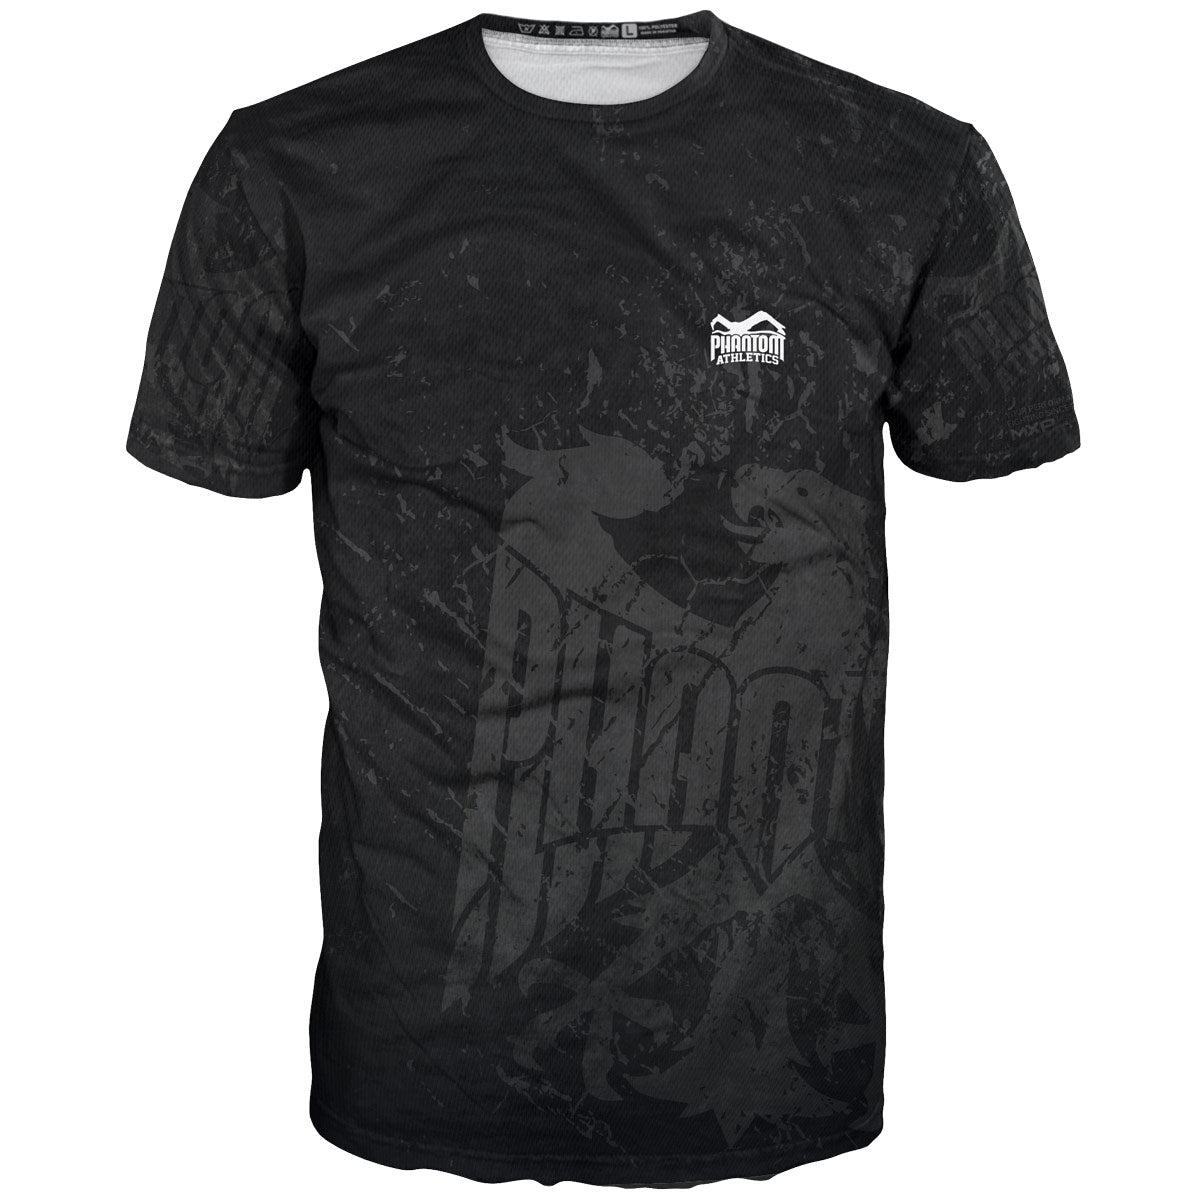 The Phantom EVO training fight shirt in Team Germany design. With Germany eagle and "Never Back Down" lettering. Ideal for your combat sports, such as MMA, Muay Thai, wrestling, BJJ or kickboxing.